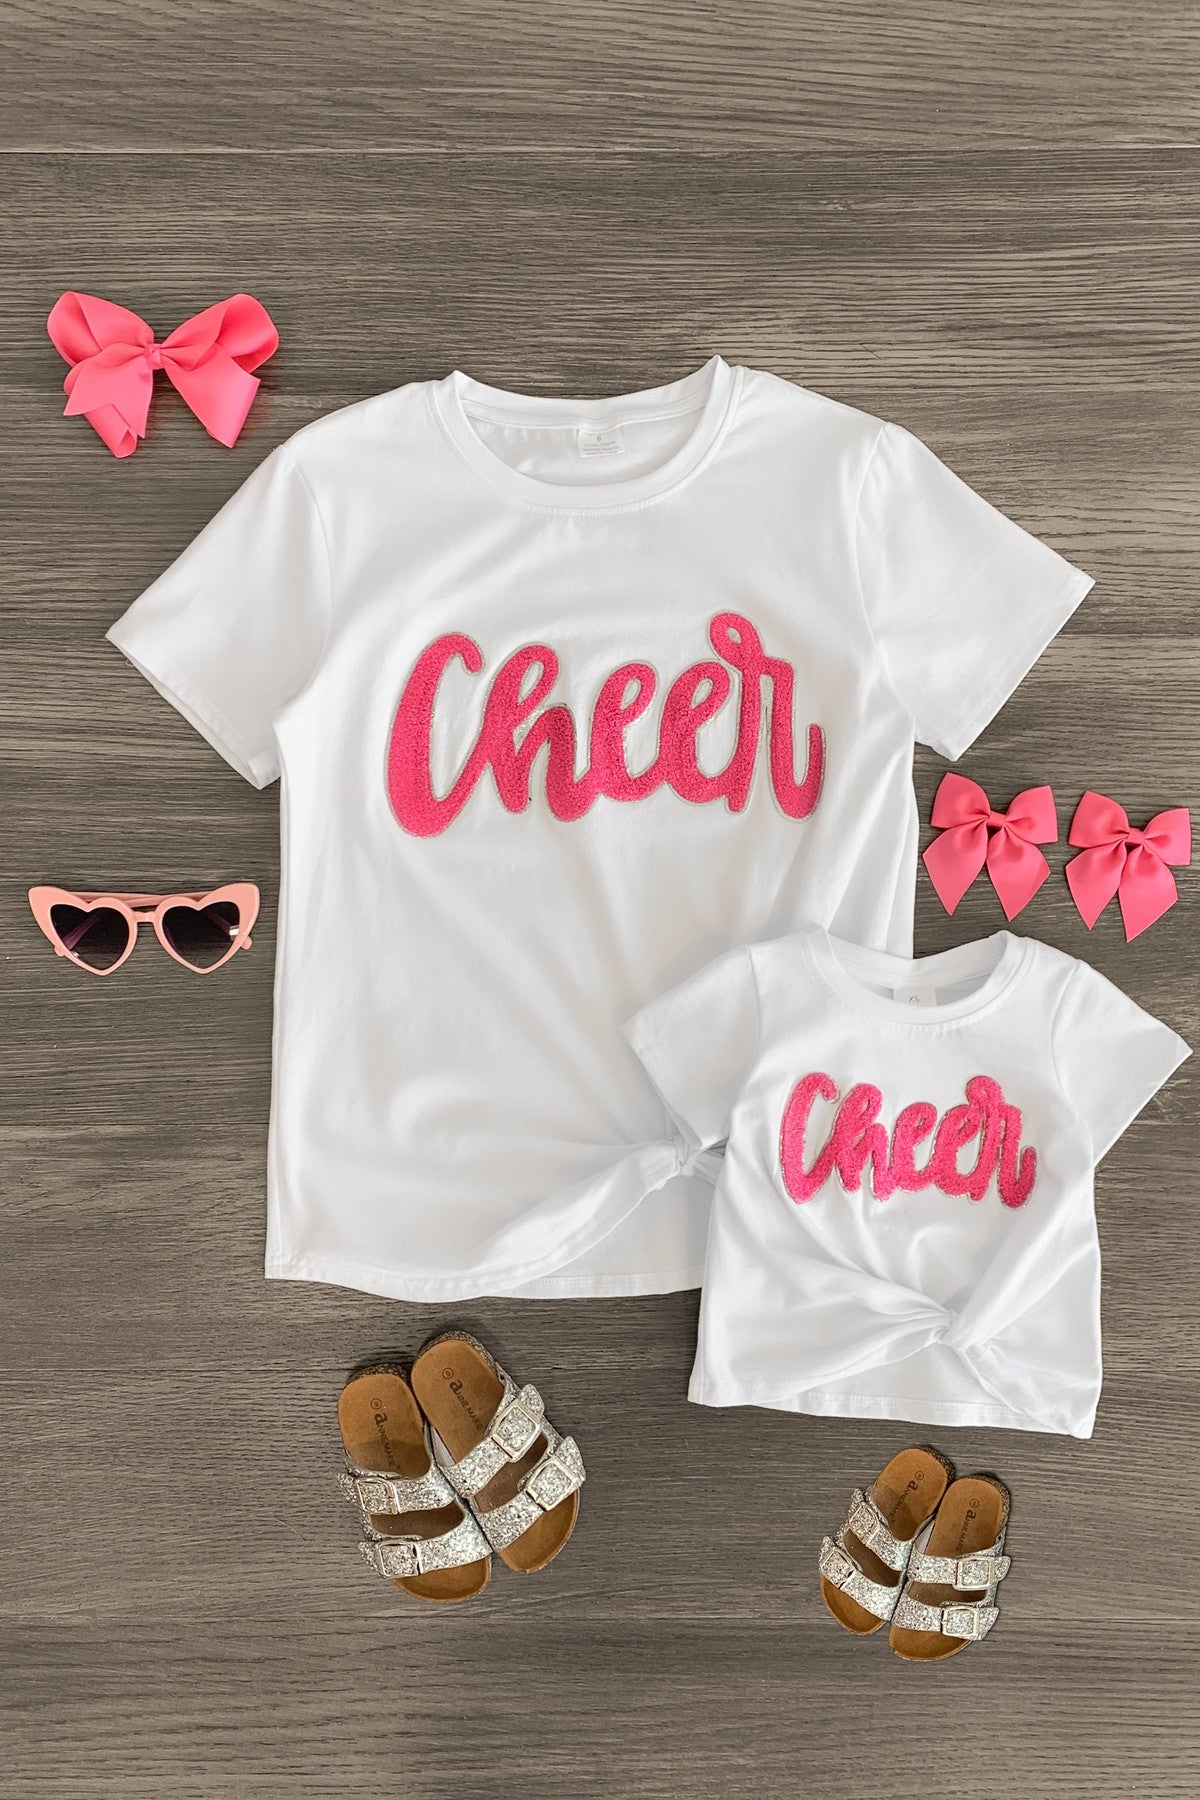 Mom & Me - "Cheer" Chenille Patch Short Sleeve Top - Sparkle in Pink